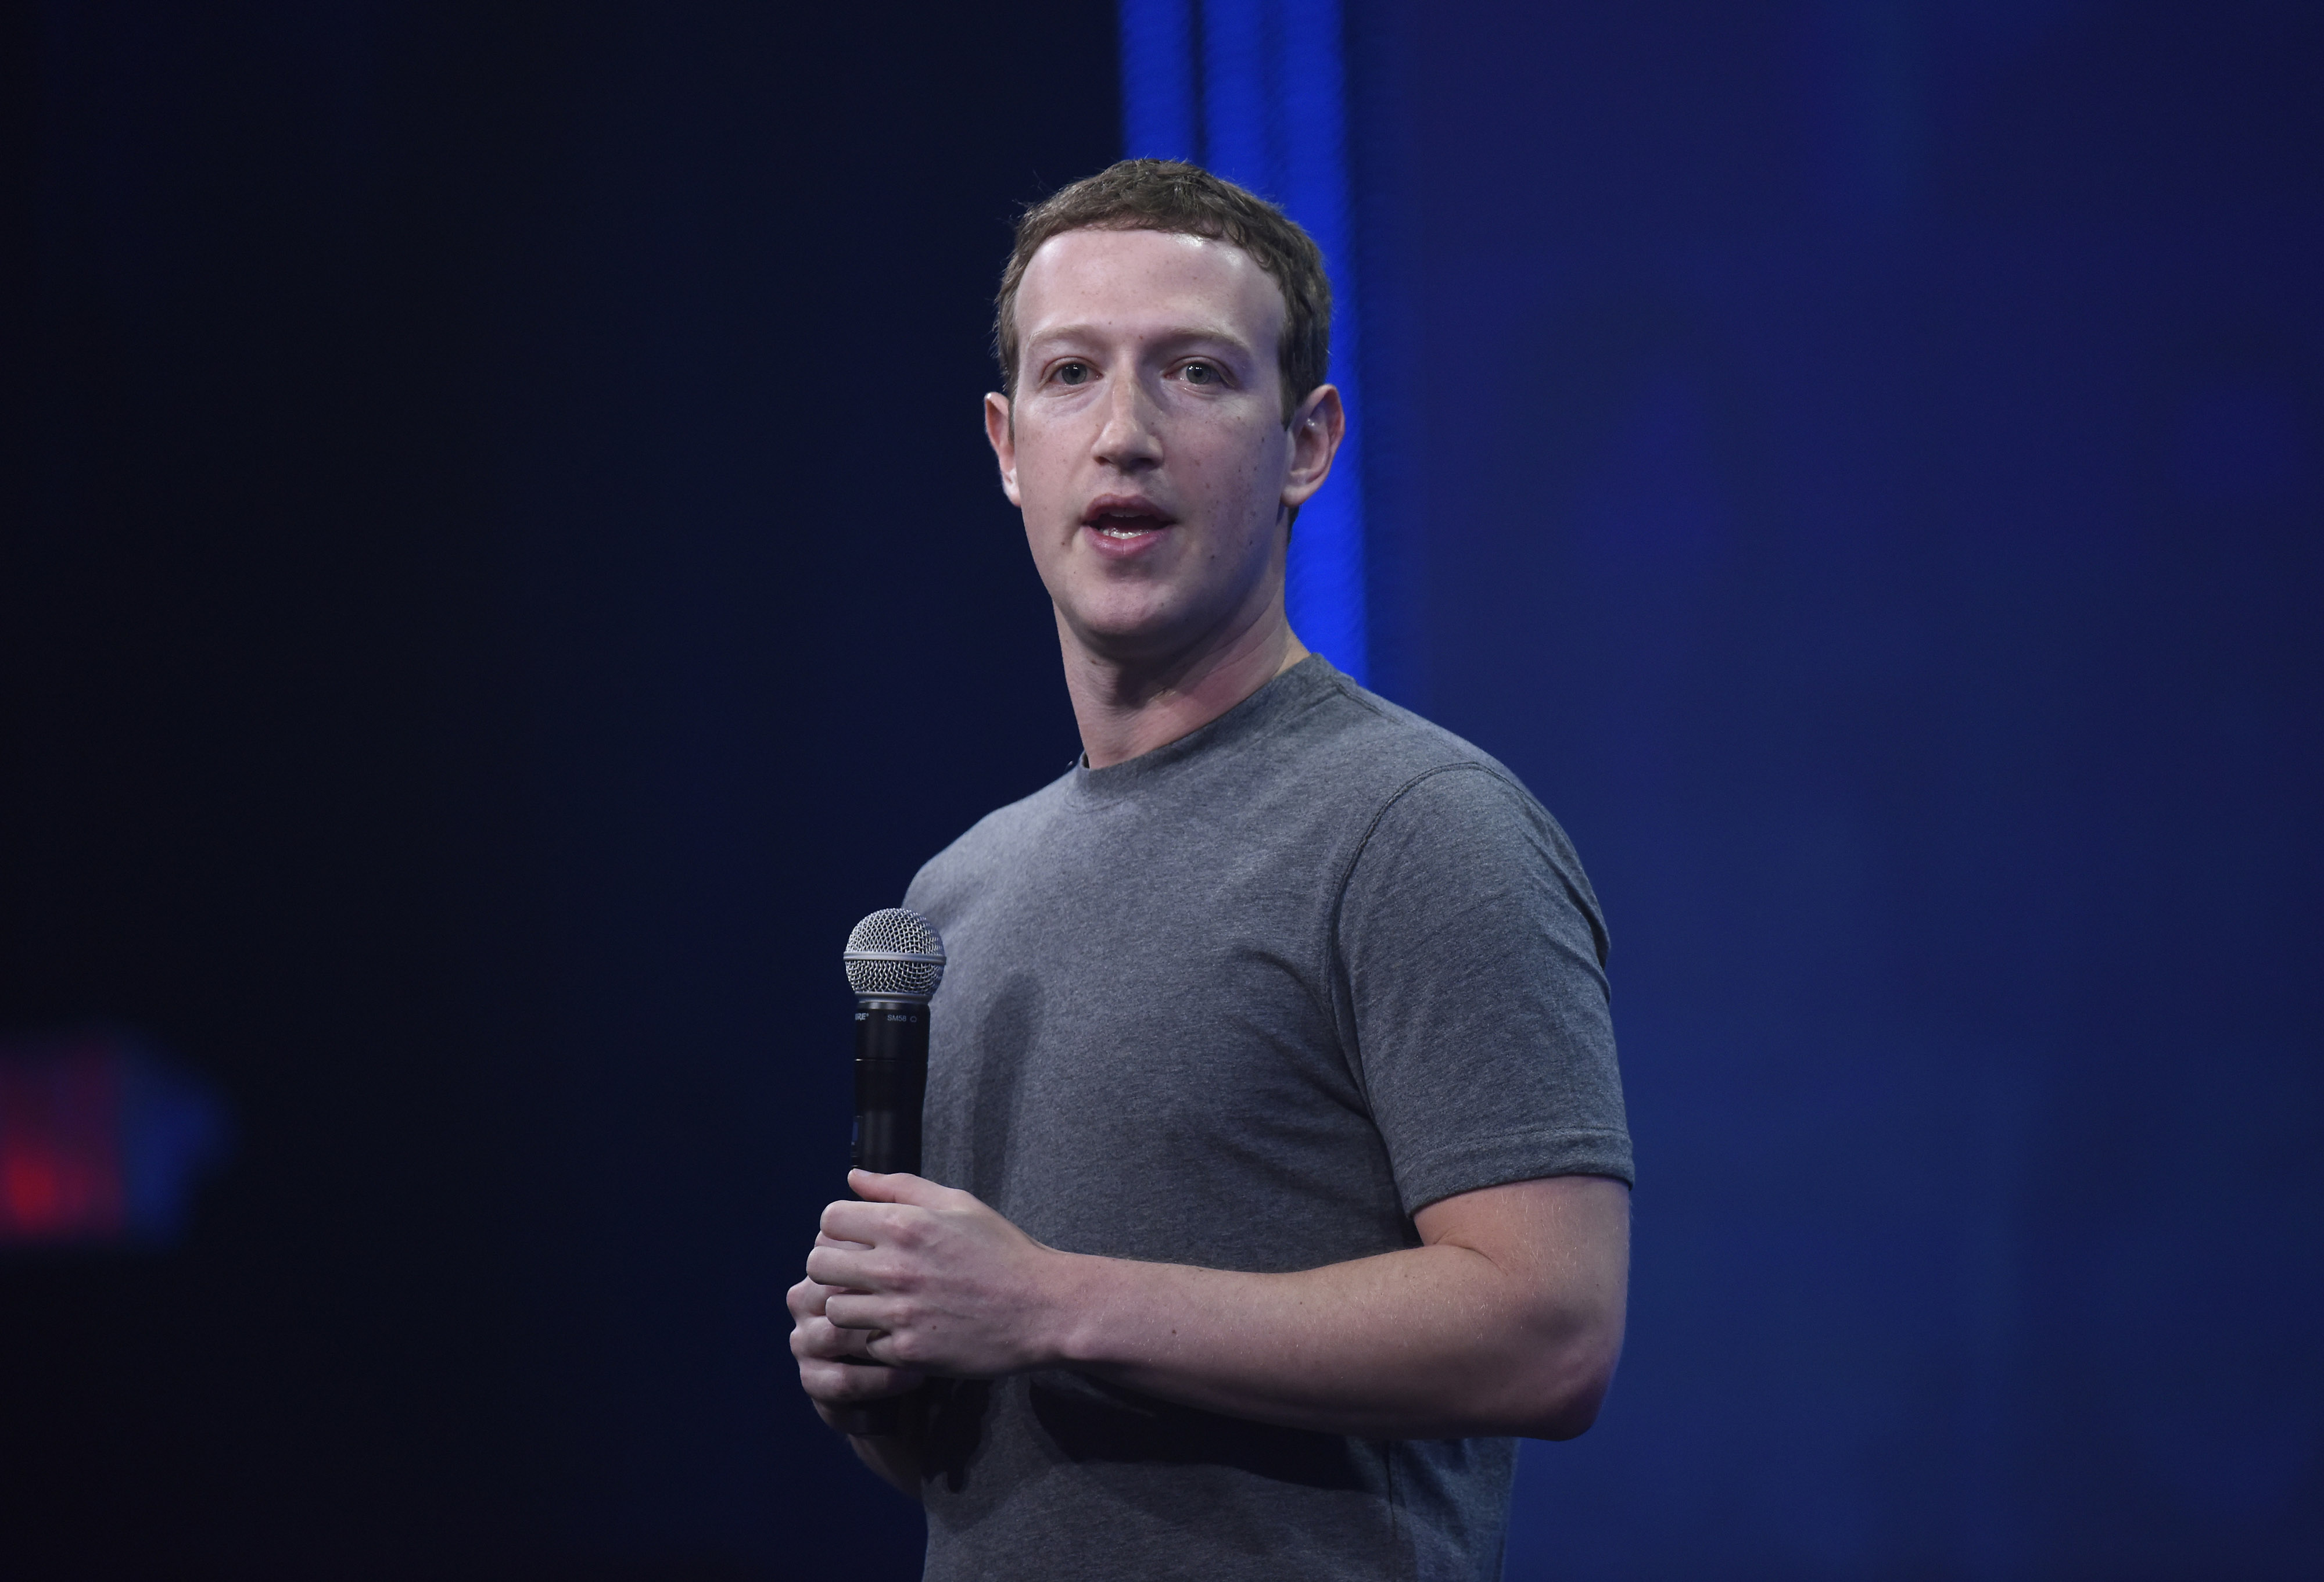 Mark Zuckerberg, chief executive officer of Facebook Inc., speaks during the Facebook F8 Developers Conference in San Francisco, Calif., on March 25, 2015. (David Paul Morris&mdash;Bloomberg Finance LP)